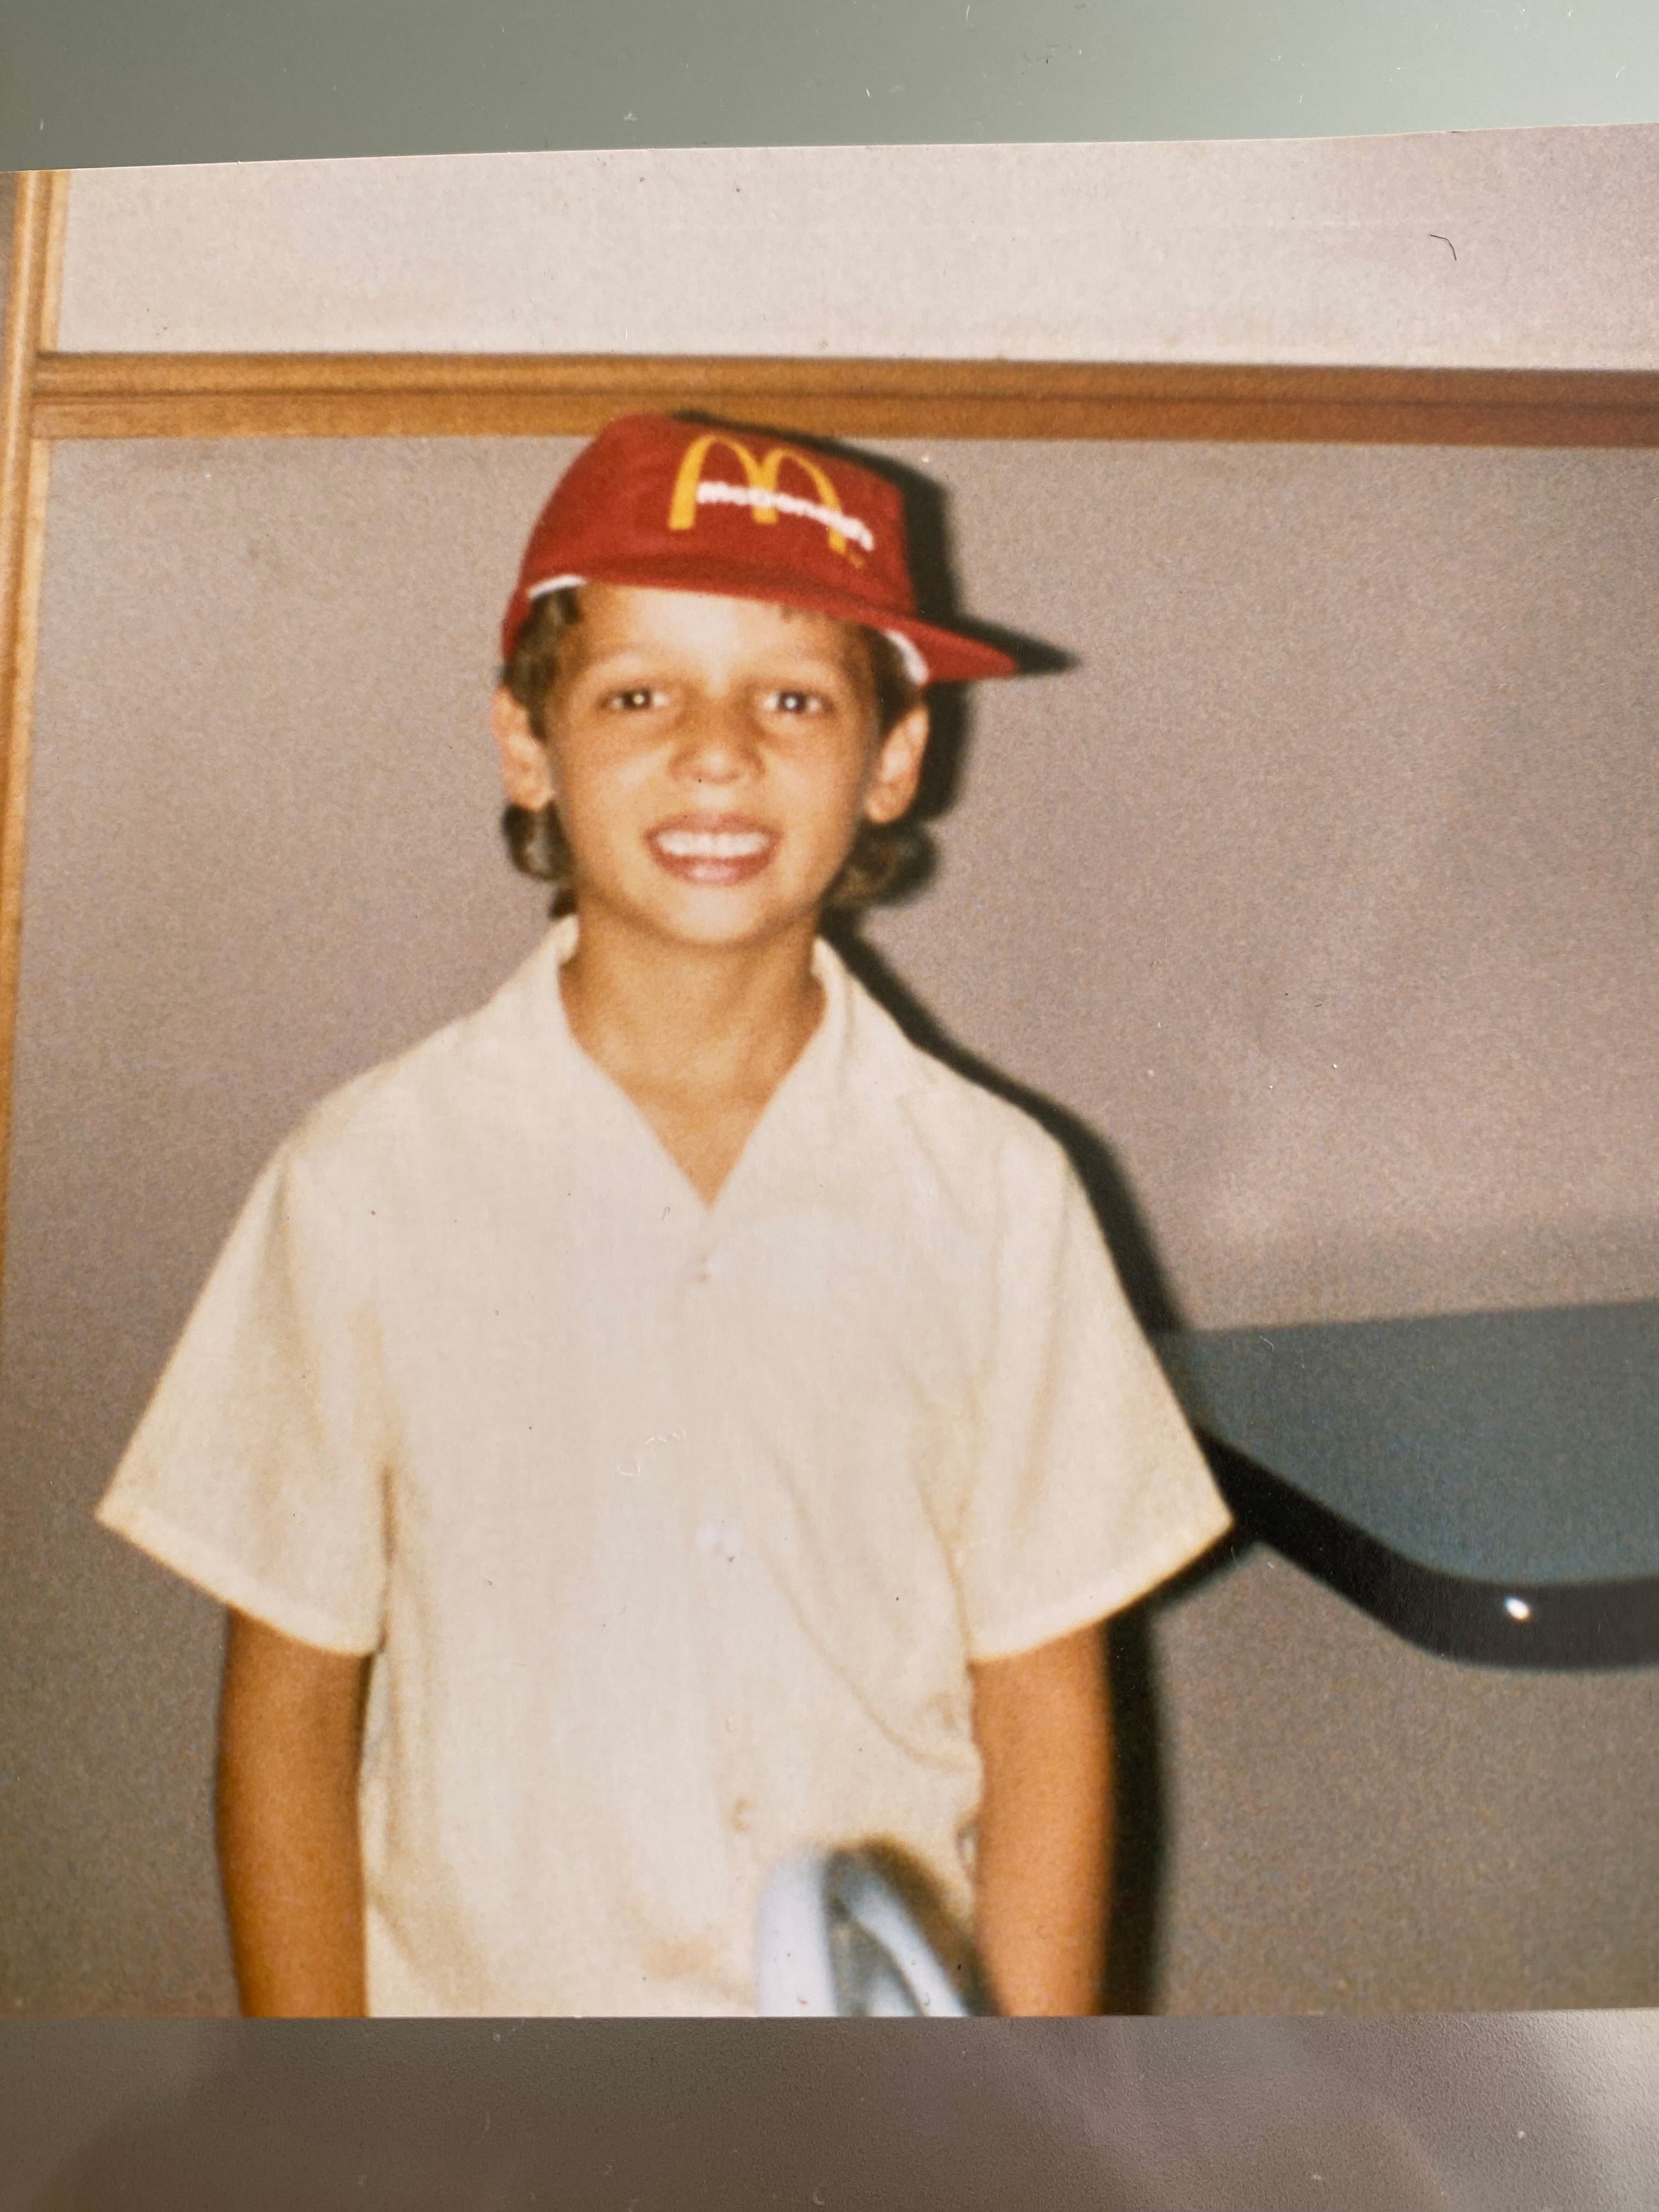 A printed photo of young Maltese Australian boy smiling and wearing a pale yellow shirt and a red McDonalds cap.